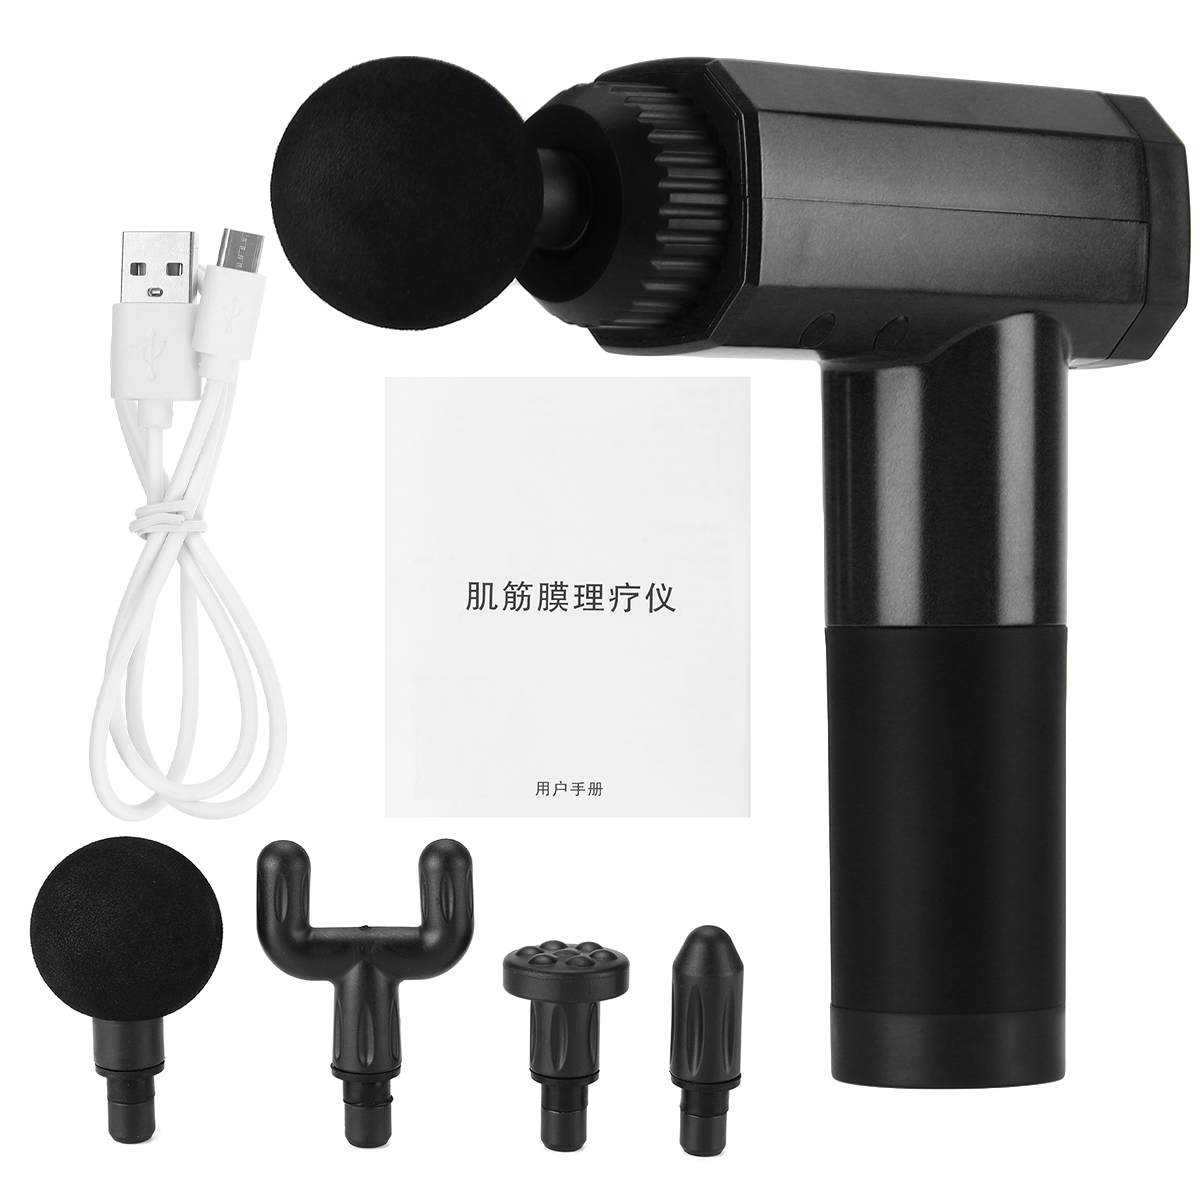 80W-Smart-Touch-LED-Electric-Percussive-Massager-4-Gears-USB-Rechargeable-Deep-Muscle-Shock-Vibratio-1693756-10